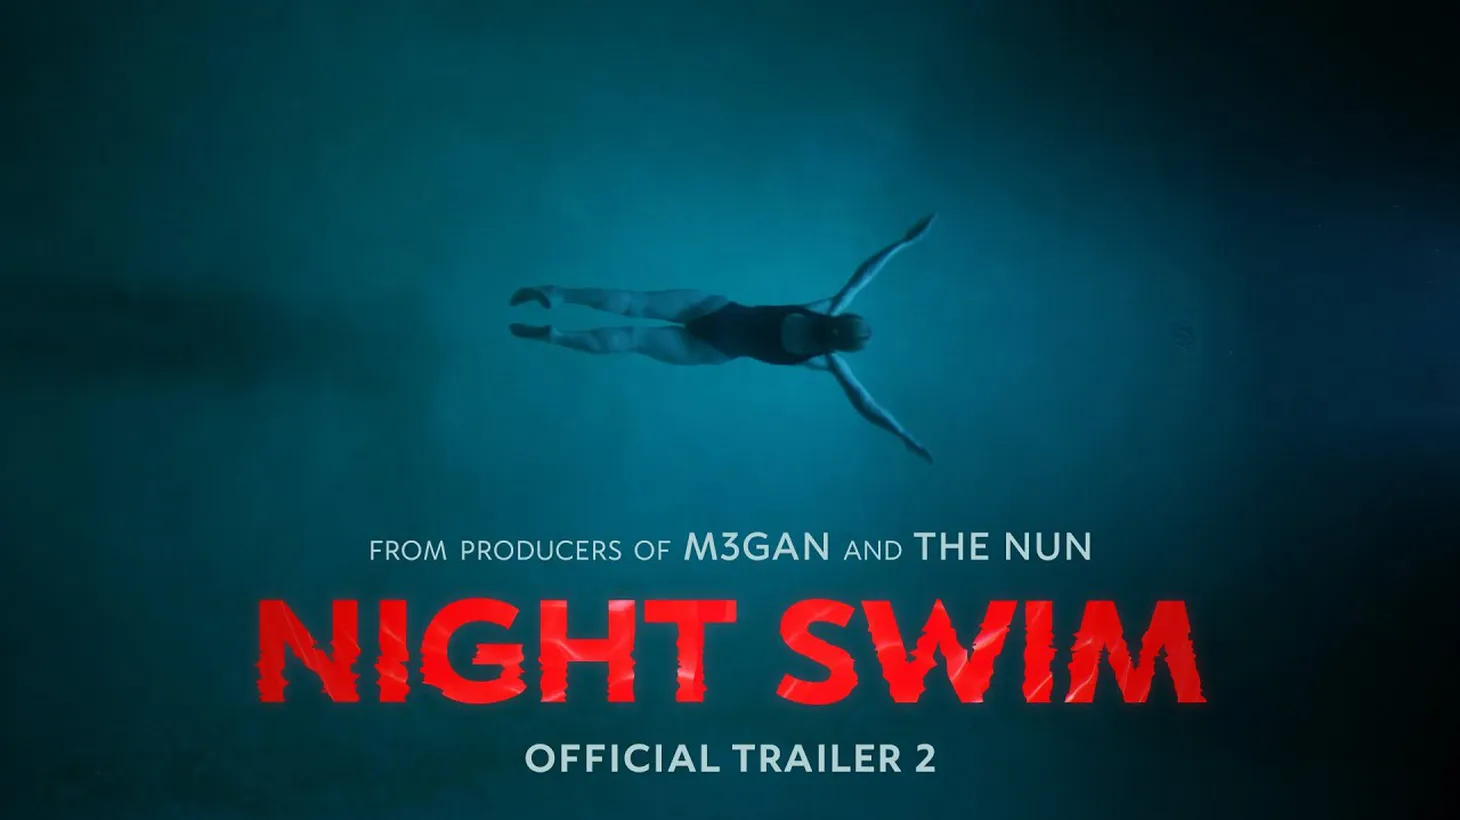 “I think this might be the most boring idea for a horror film that I have ever seen,” says film critic Amy Nichiolson about Night Swim.